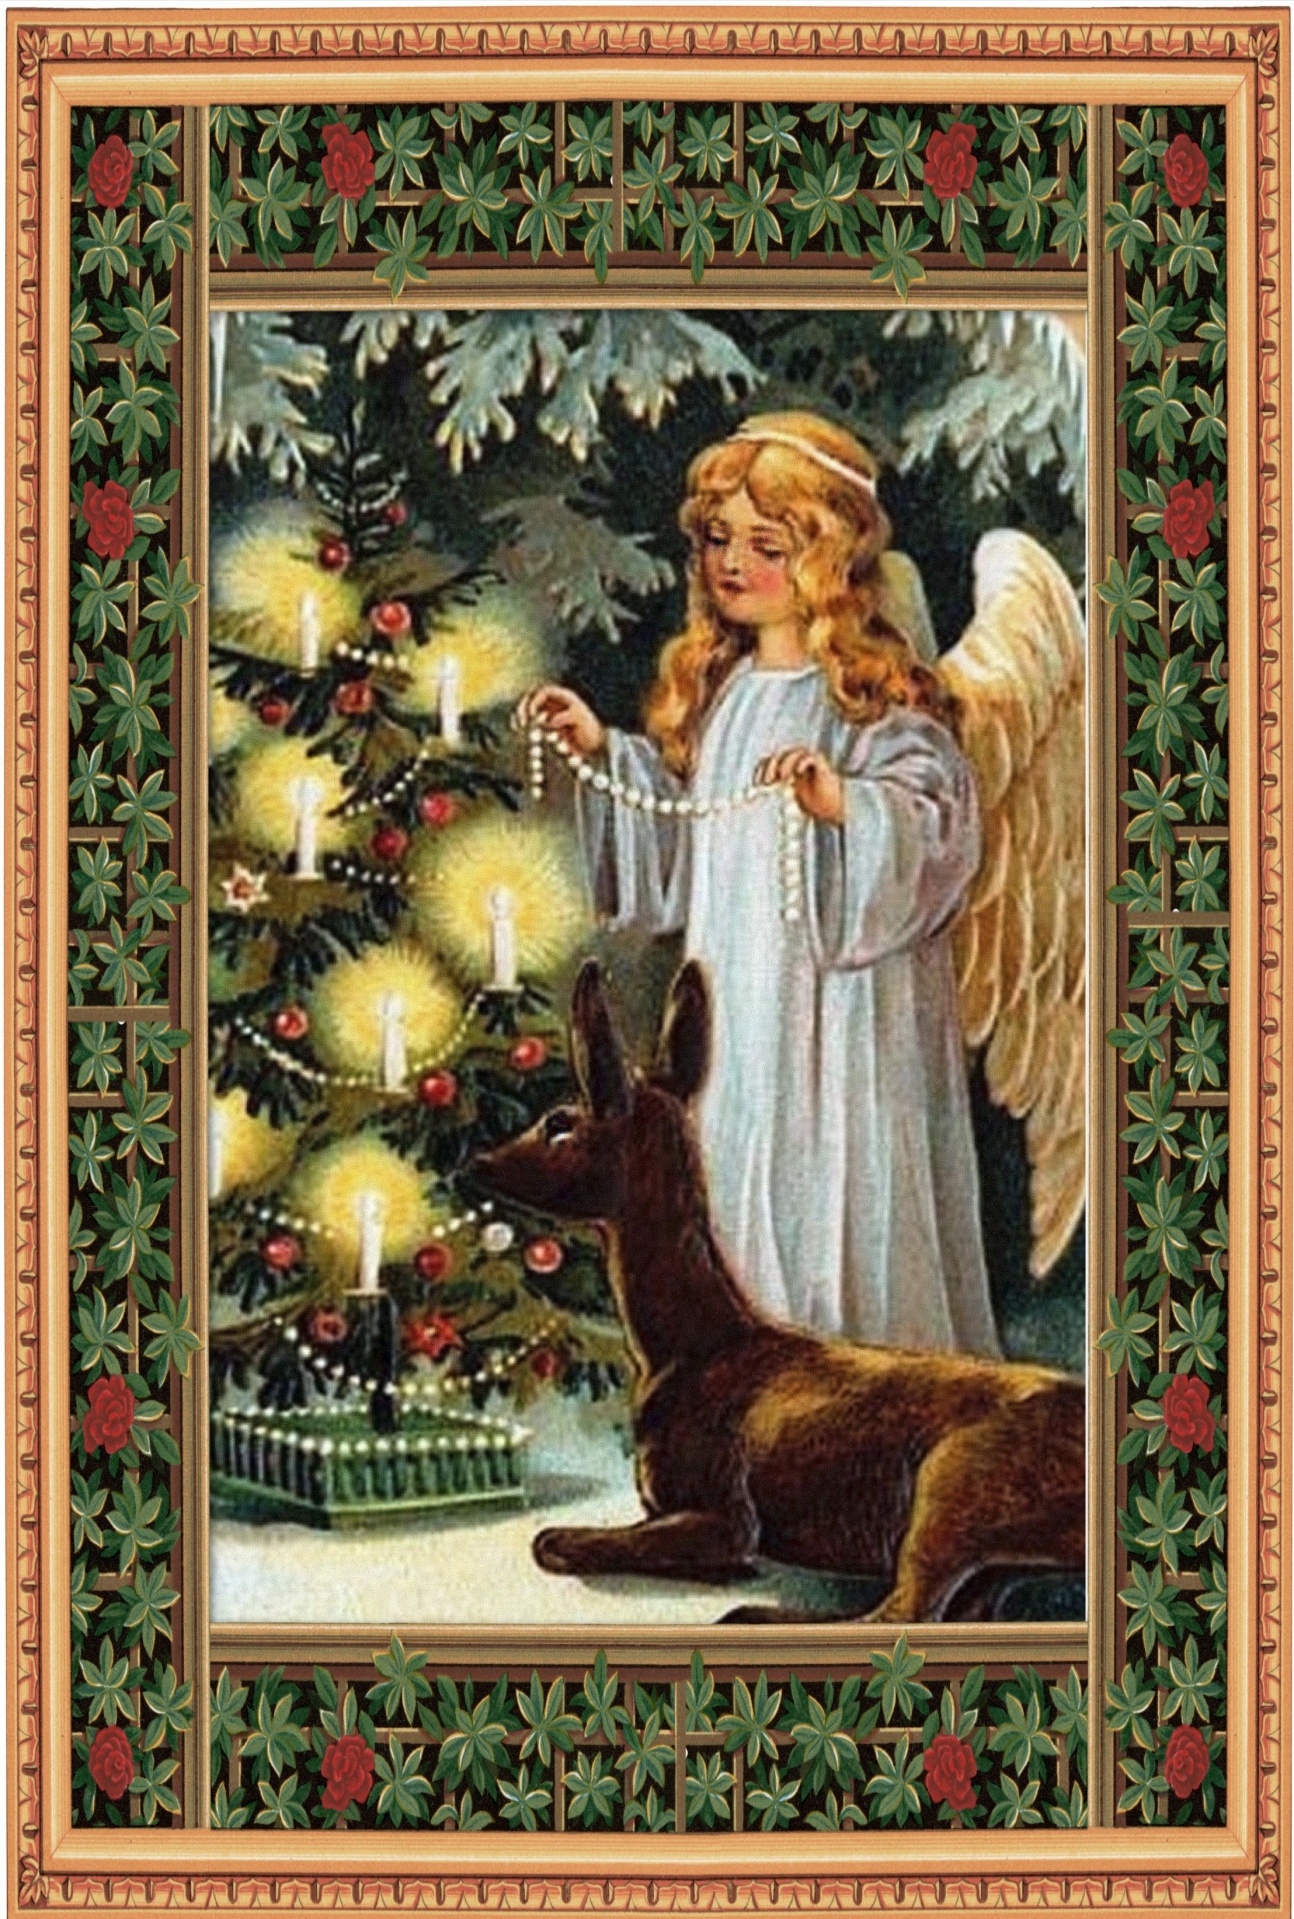 A Victorian Christmas Vintage Illustration featuring a young girl angel decorating a Christmas Tree with a deer by her side